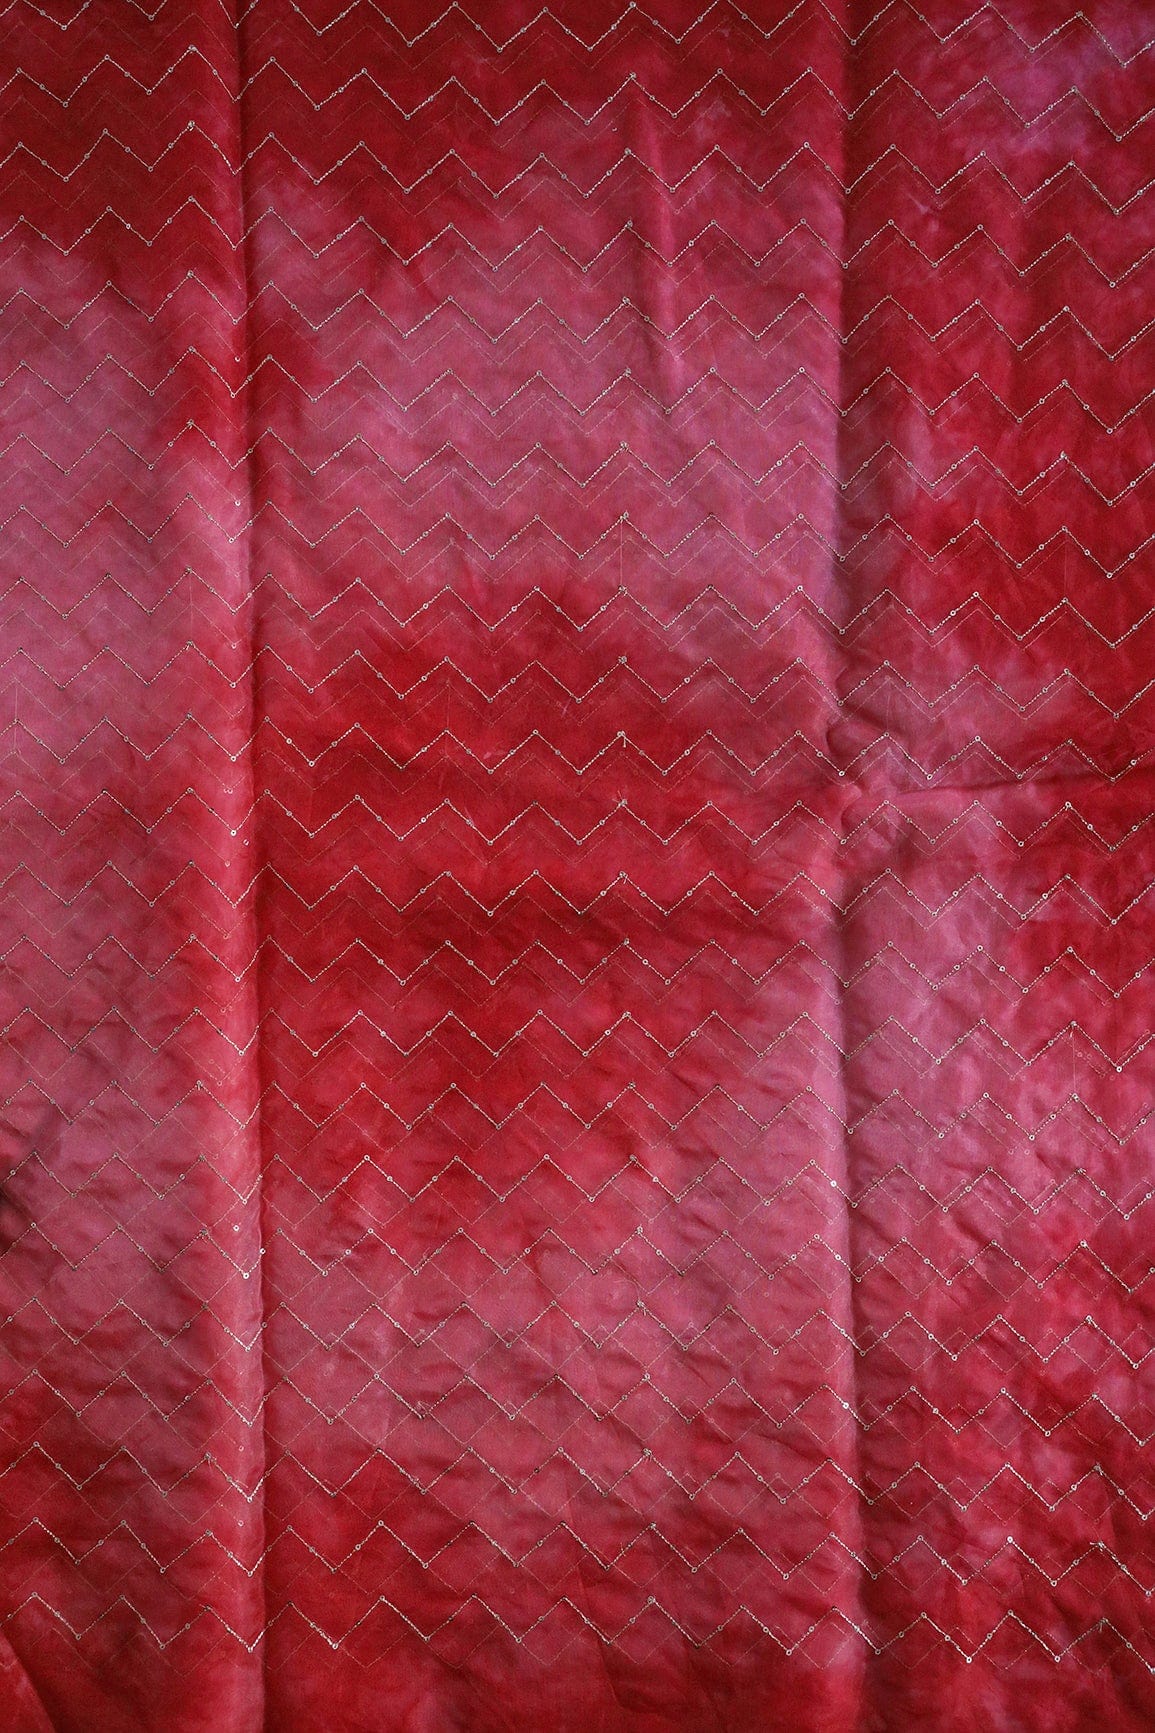 doeraa Embroidery Fabrics Gold Sequins Chevron Embroidery Work On Tie & Dye Red Organza Fabric